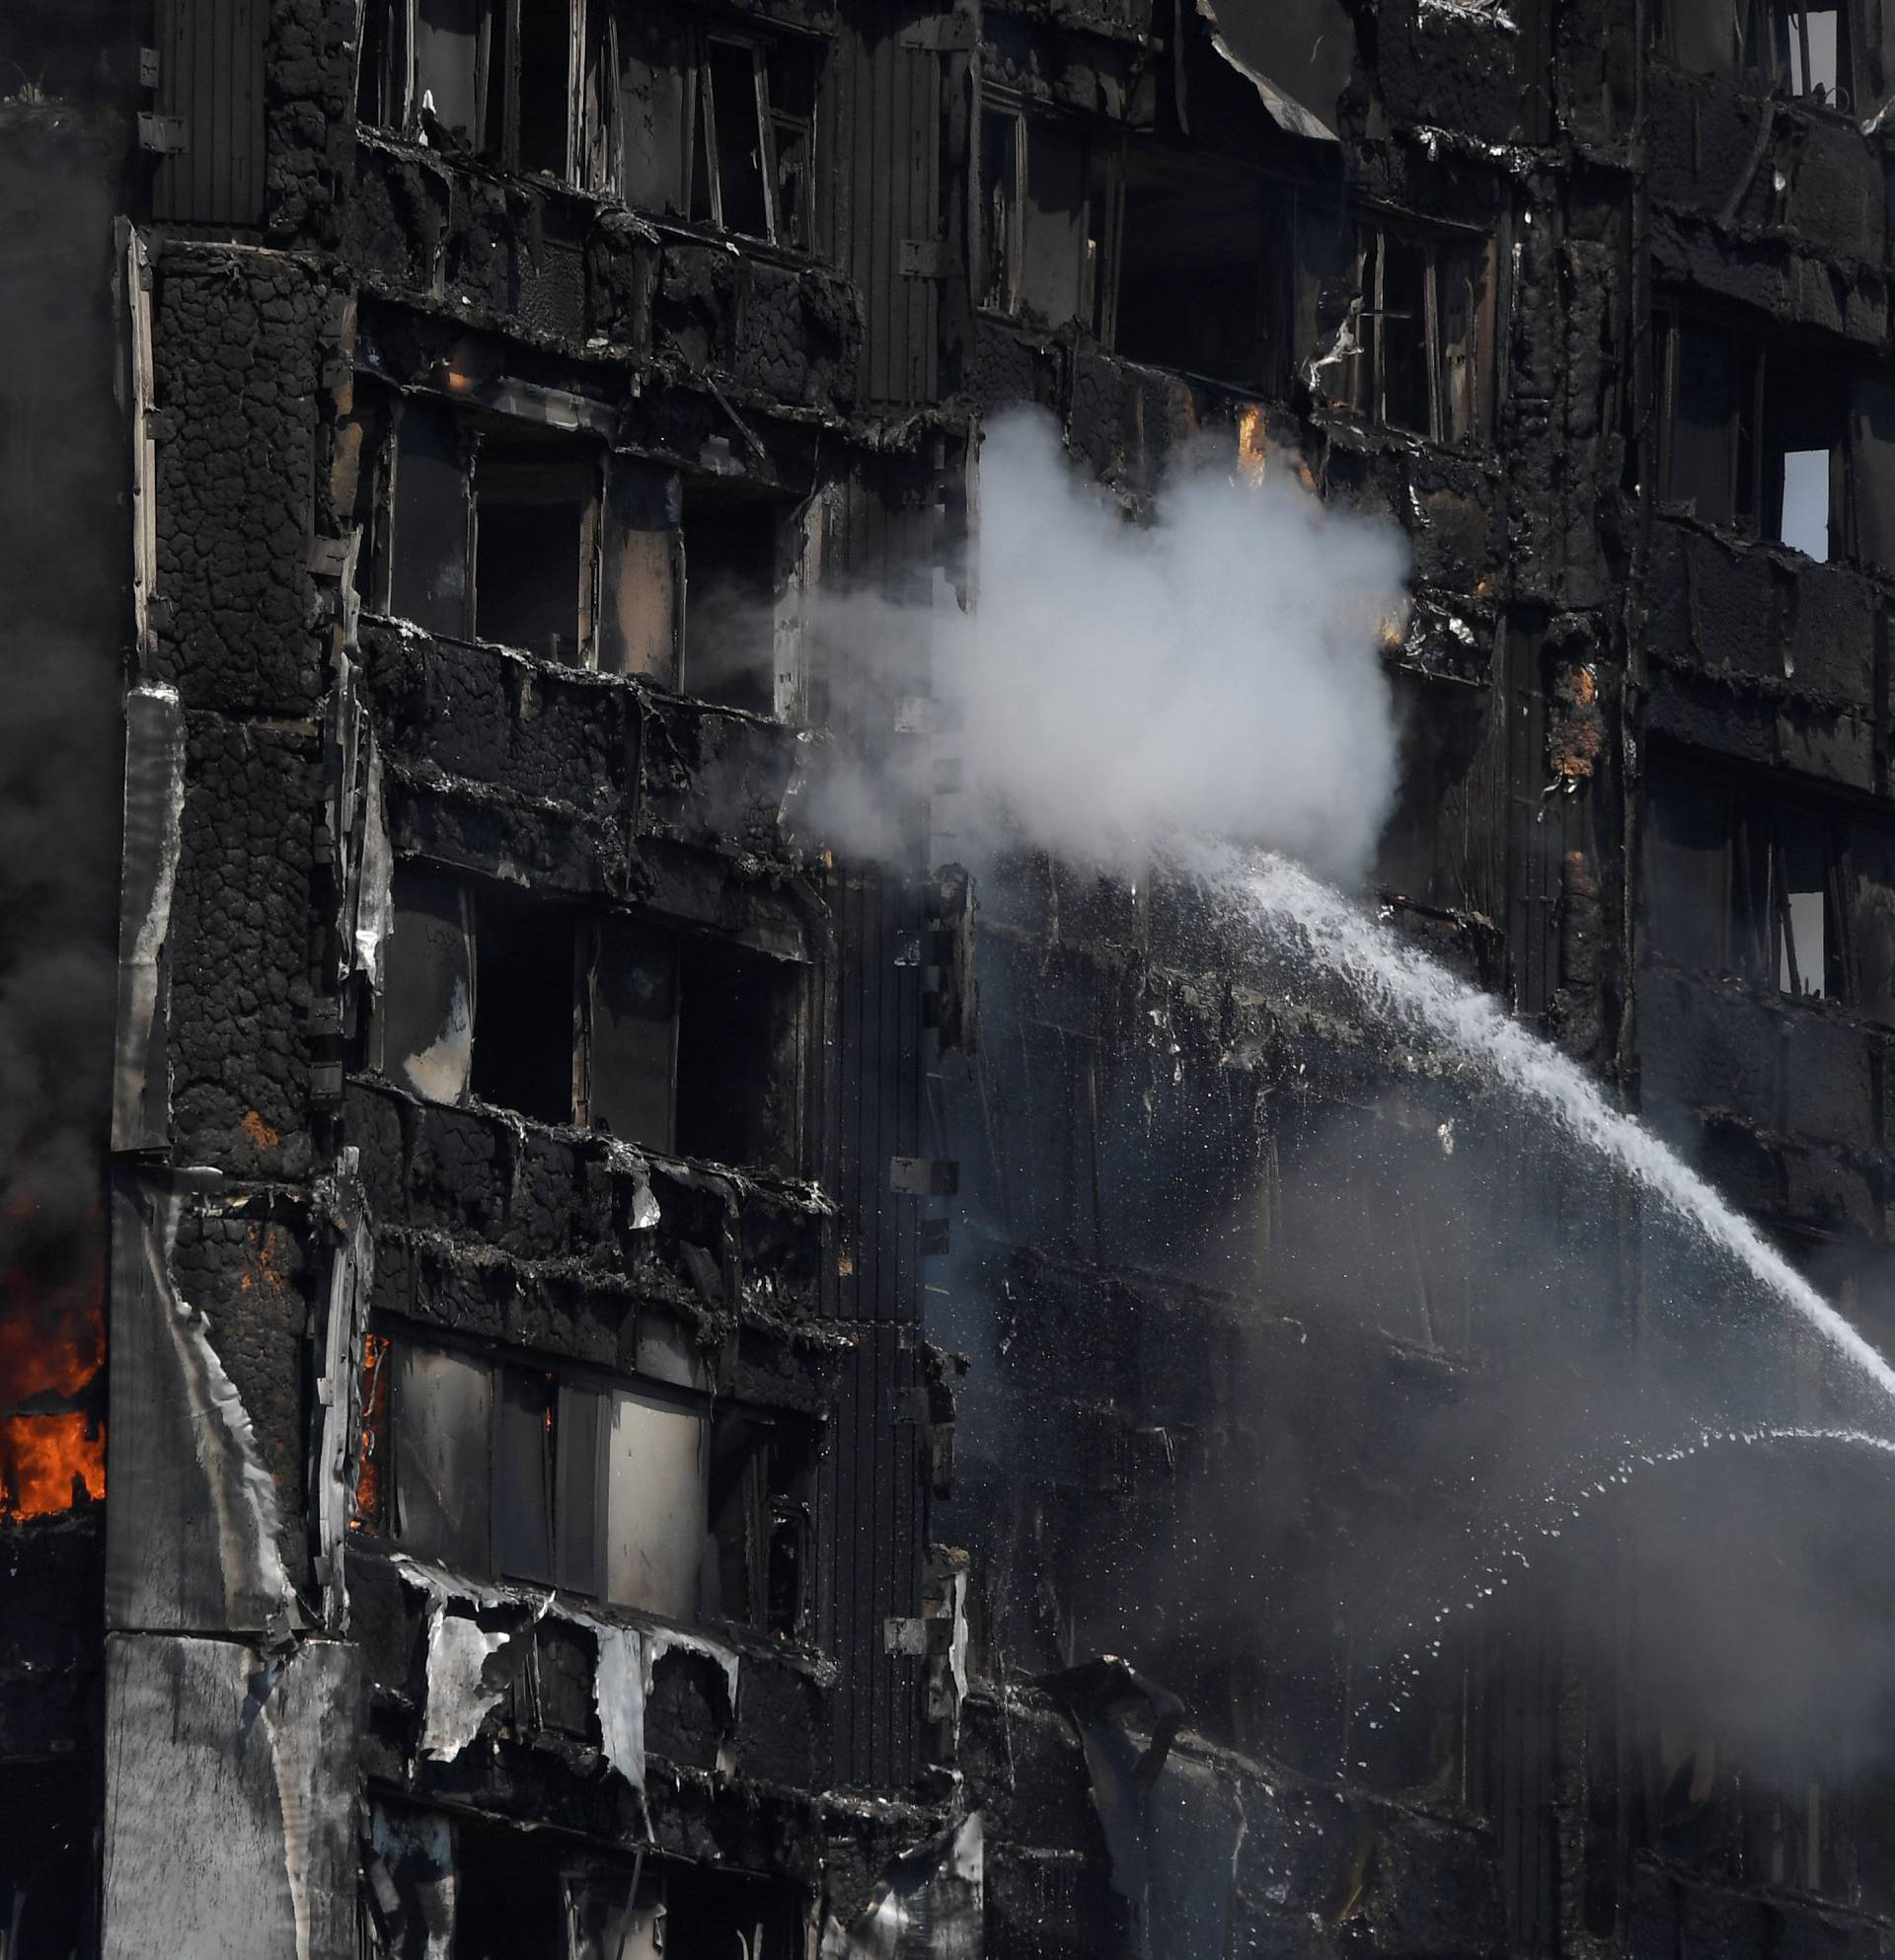 Firefighters direct jets of water onto a tower block severely damaged by a serious fire, in north Kensington, West London